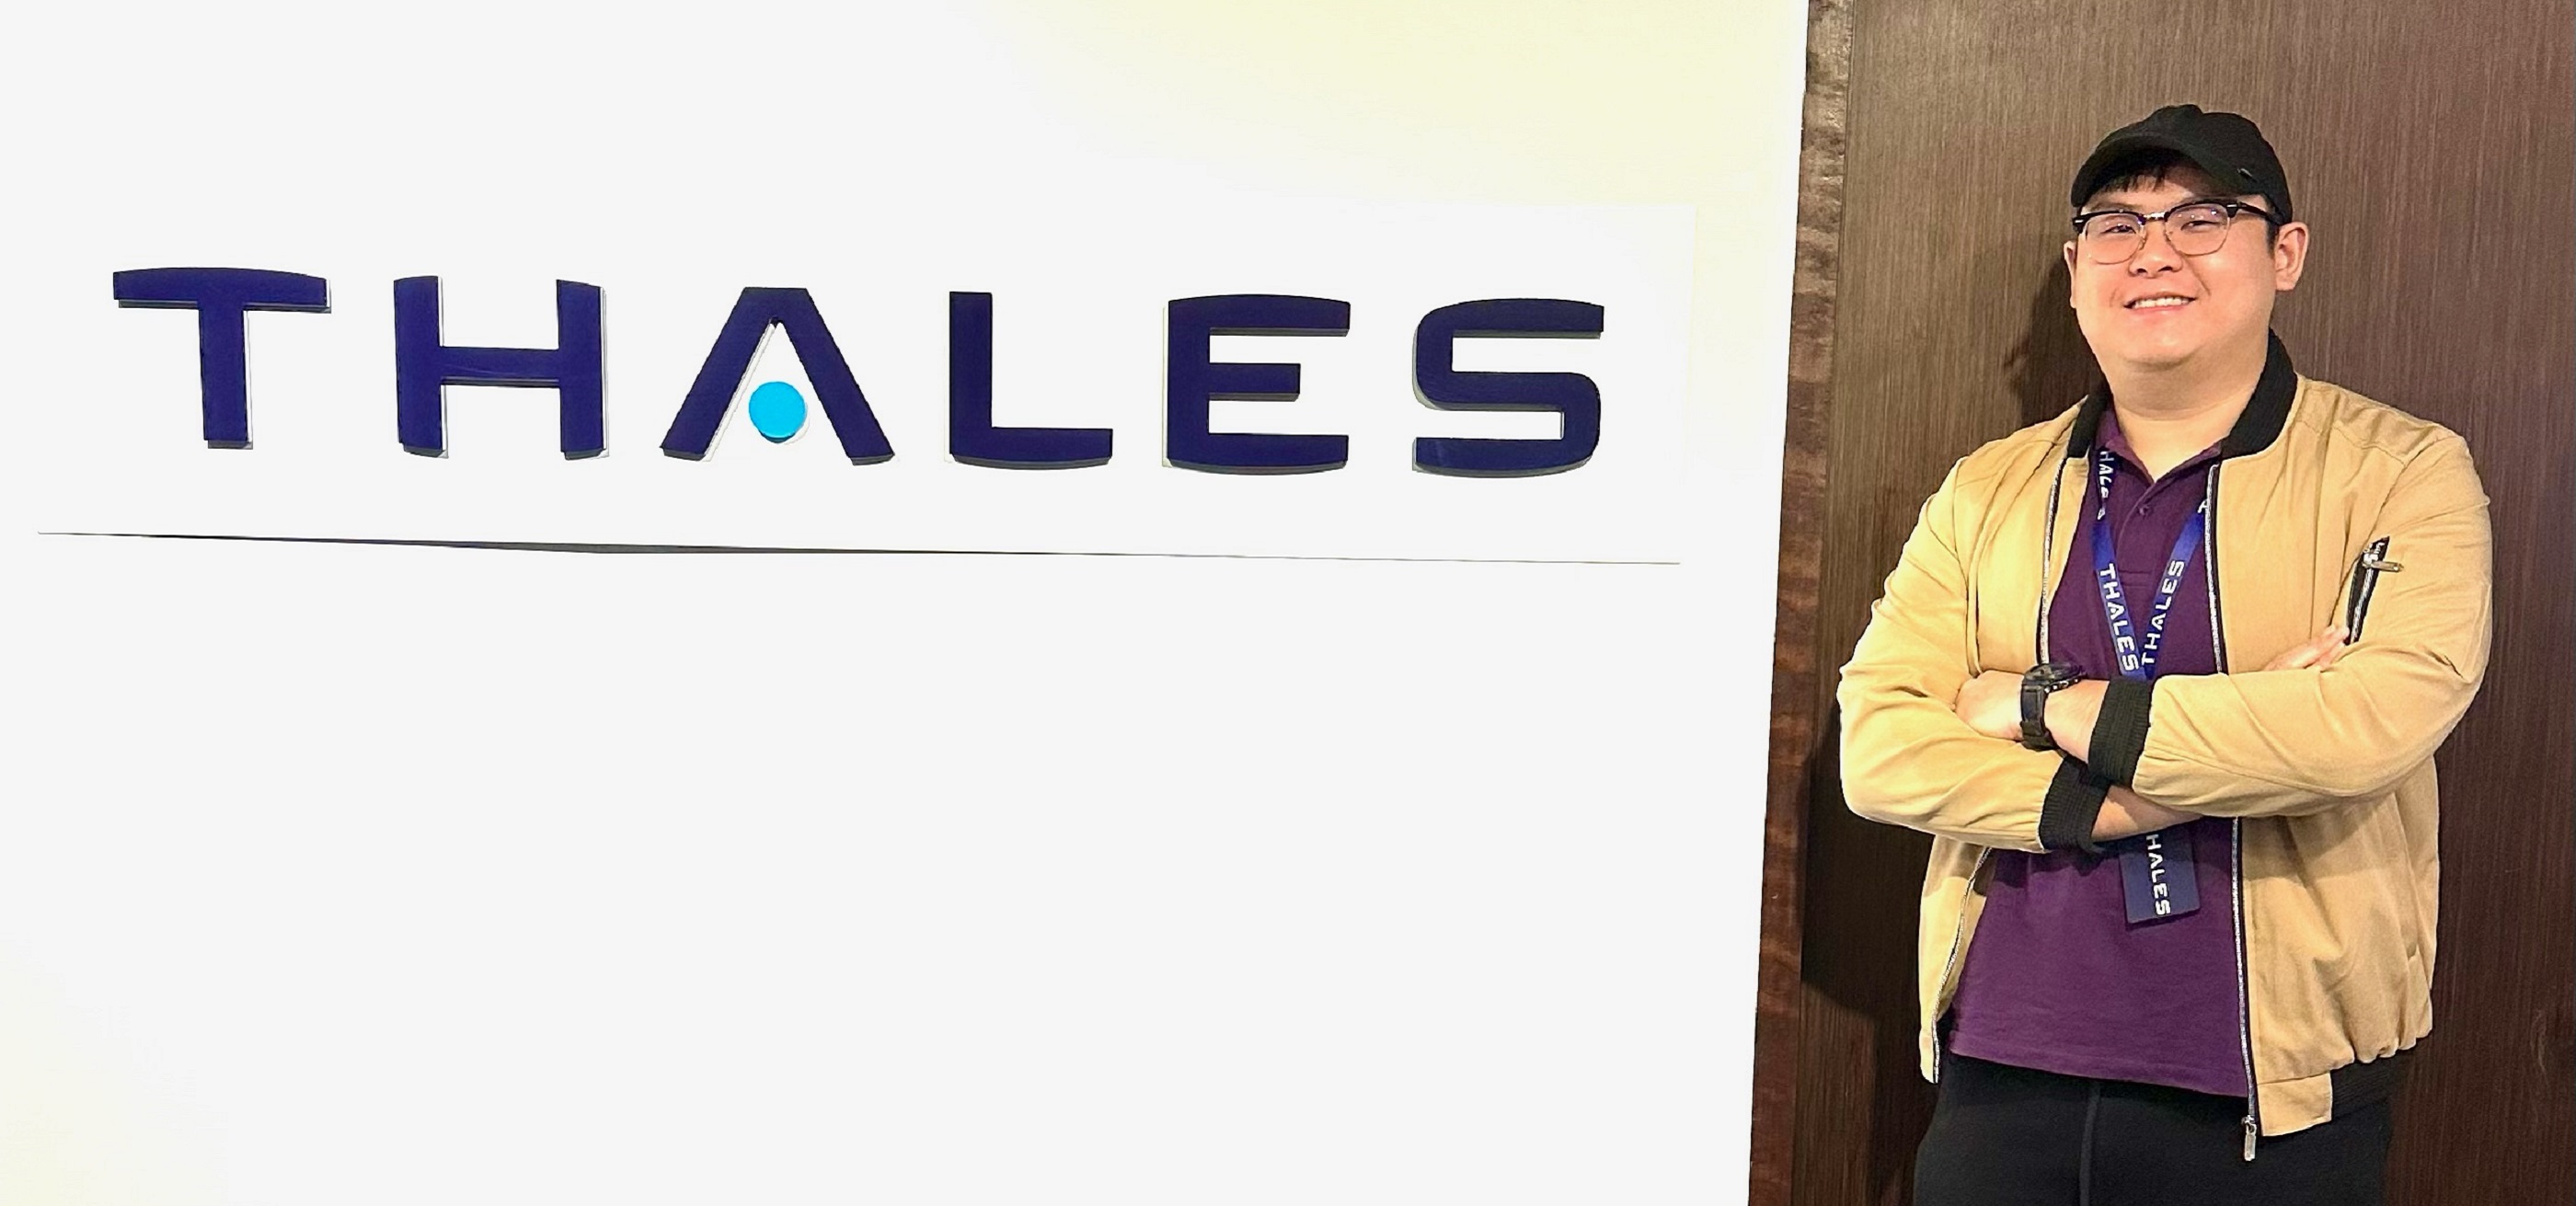 DigiPen graduate Marcus Lee stands in front of the Thales logo